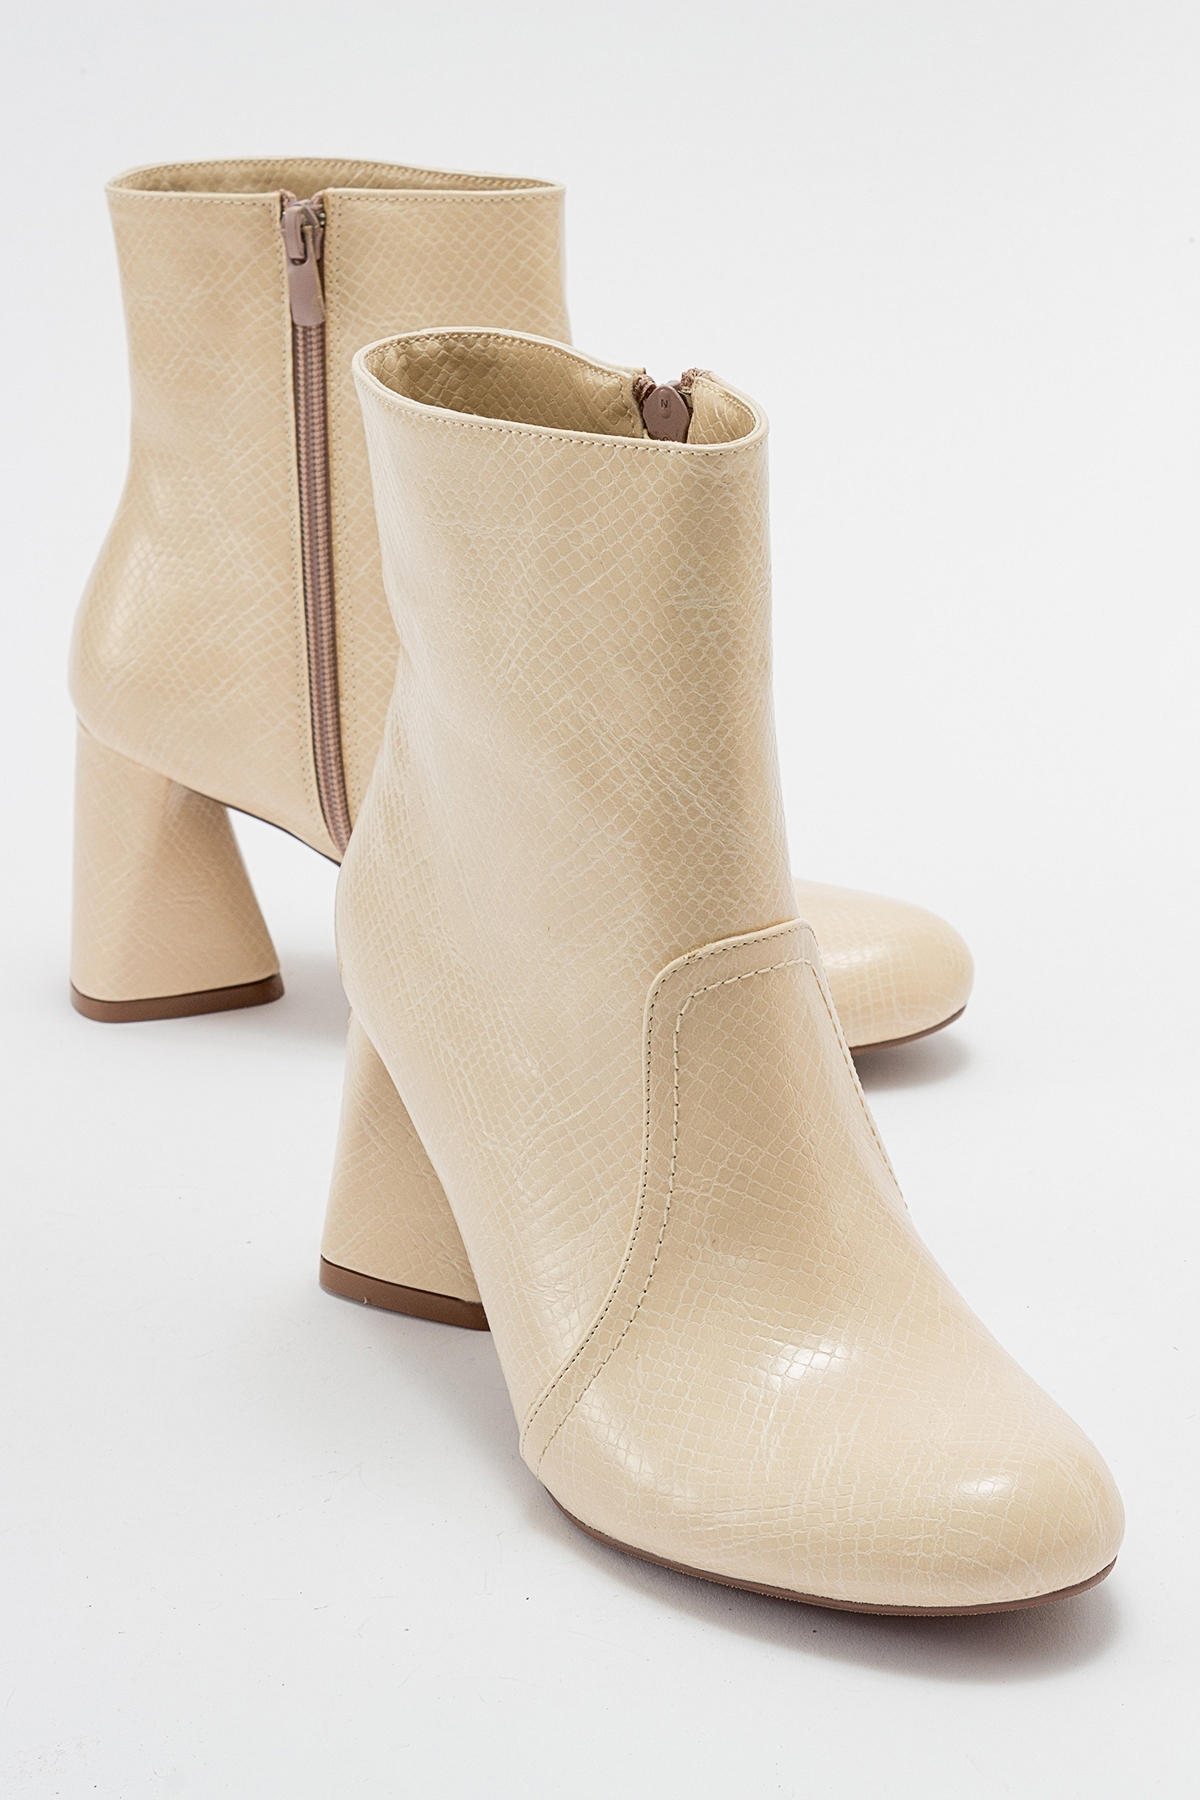 LuviShoes MIANO Women's Beige Patterned Heeled Boots.